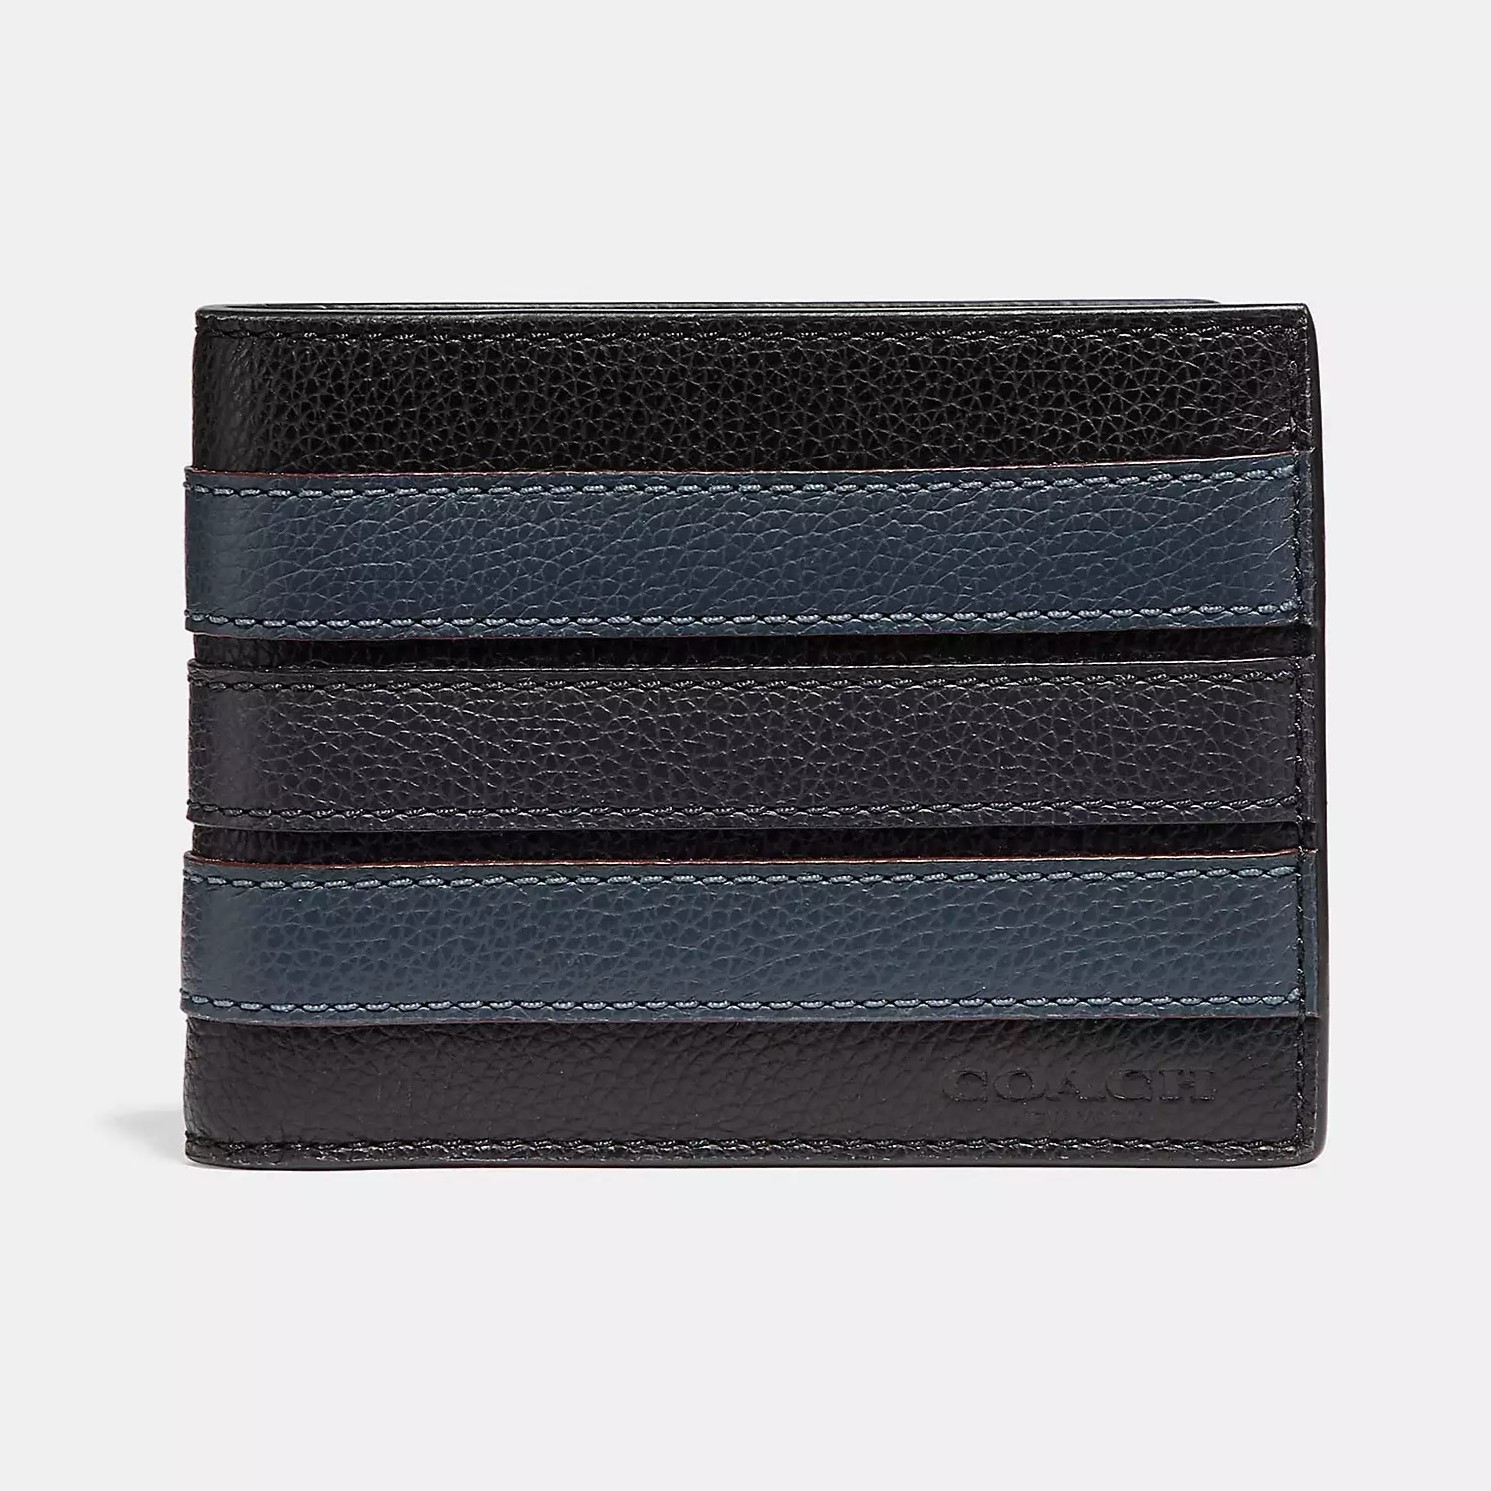 VÍ COACH NAM NGẮN SỌC GIỮA SLIM BILLFOLD WALLET WITH VARSITY STRIPE SMOOTH CALF LEATHER F26171 2